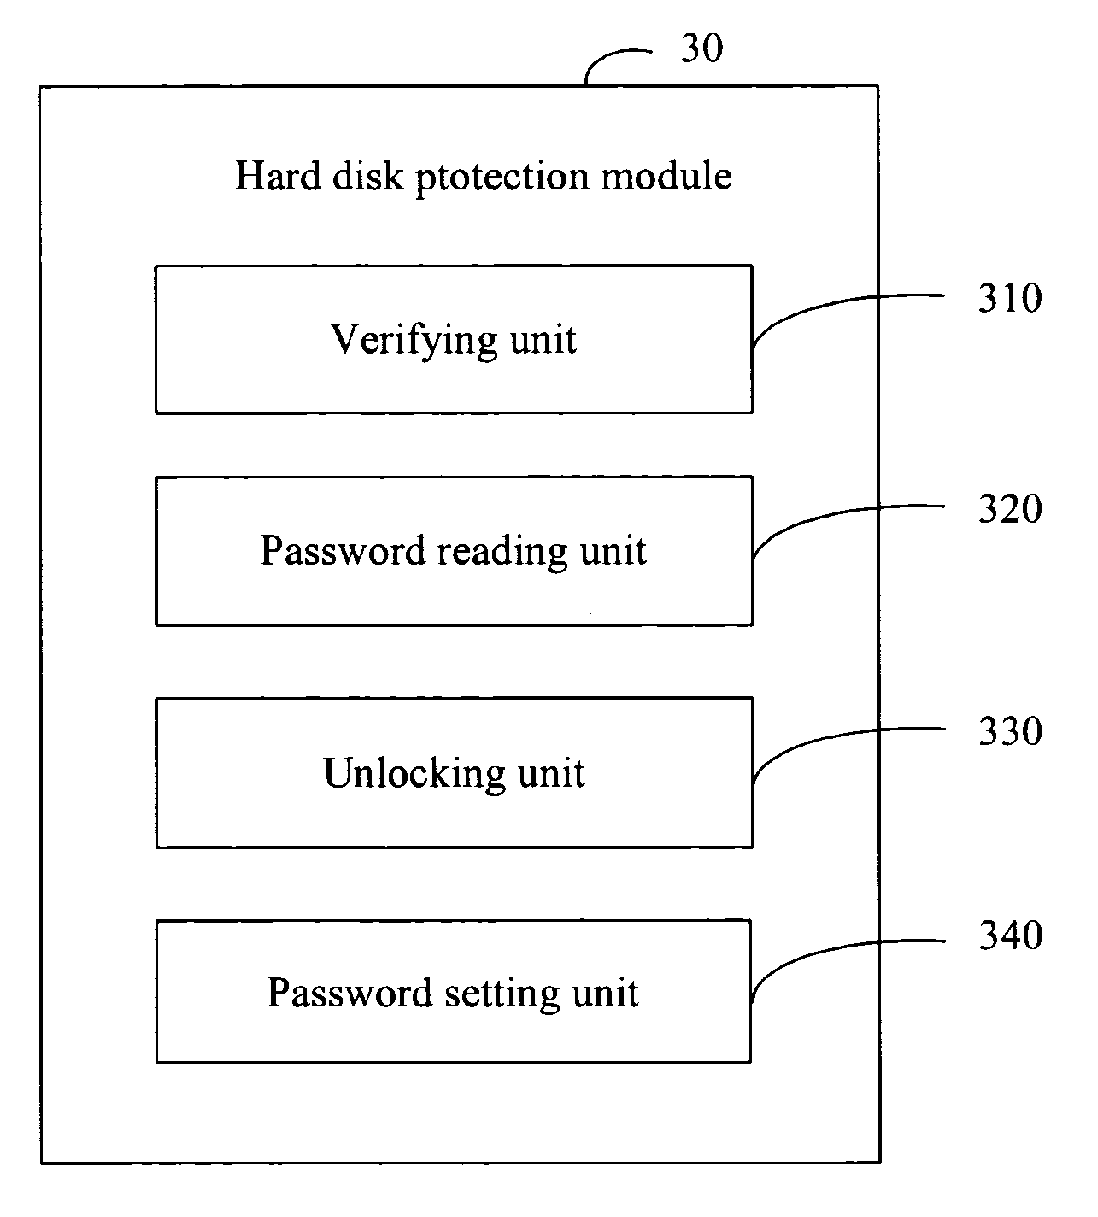 System and method for hard disk protection